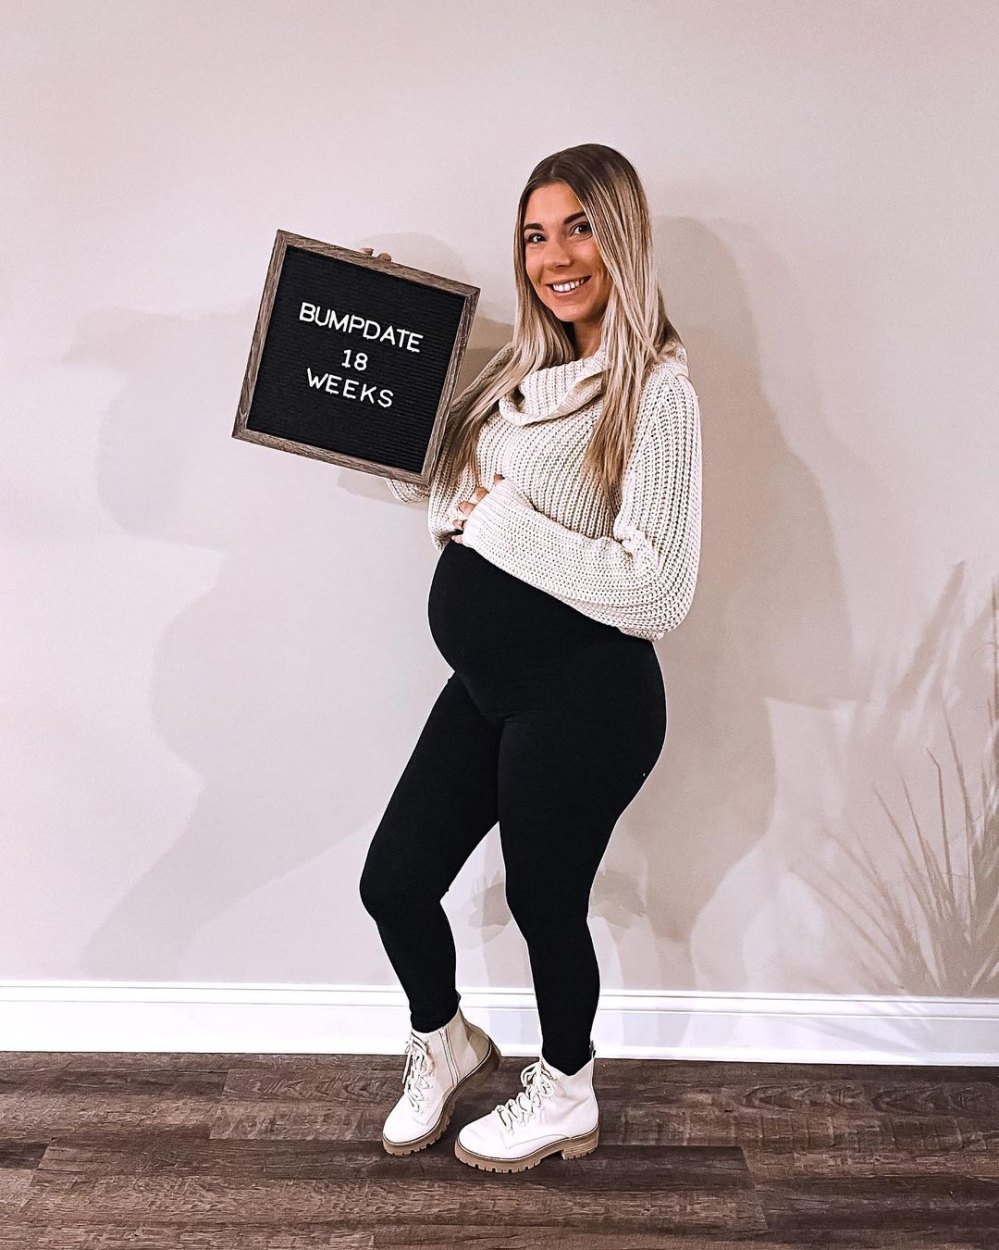 Pregnant Celebrities' Baby Bumps in 2021: Photos